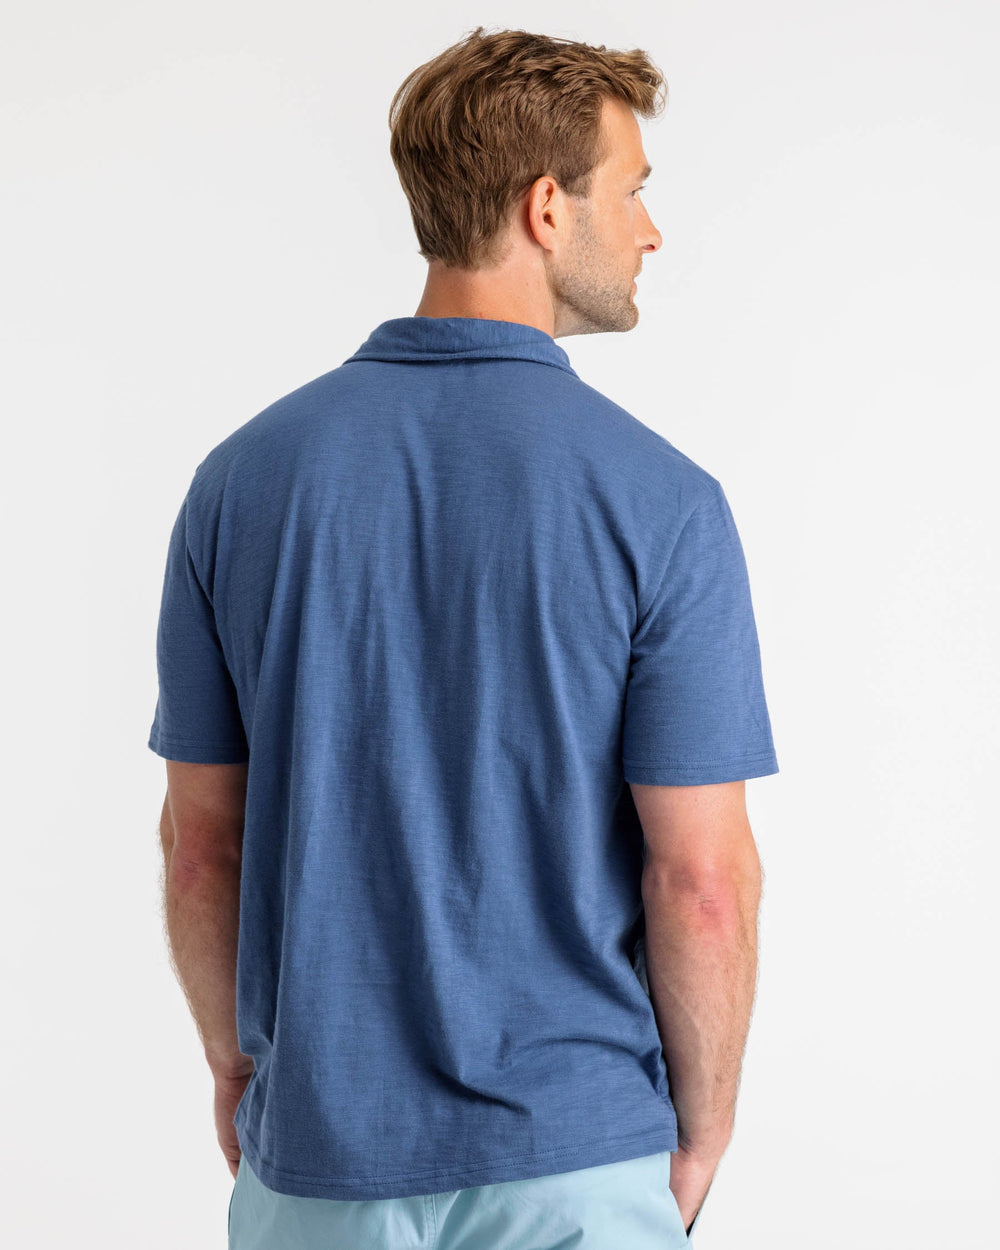 The back view of the Southern Tide Mesa Sun Farer Polo Shirt by Southern Tide - Aged Denim